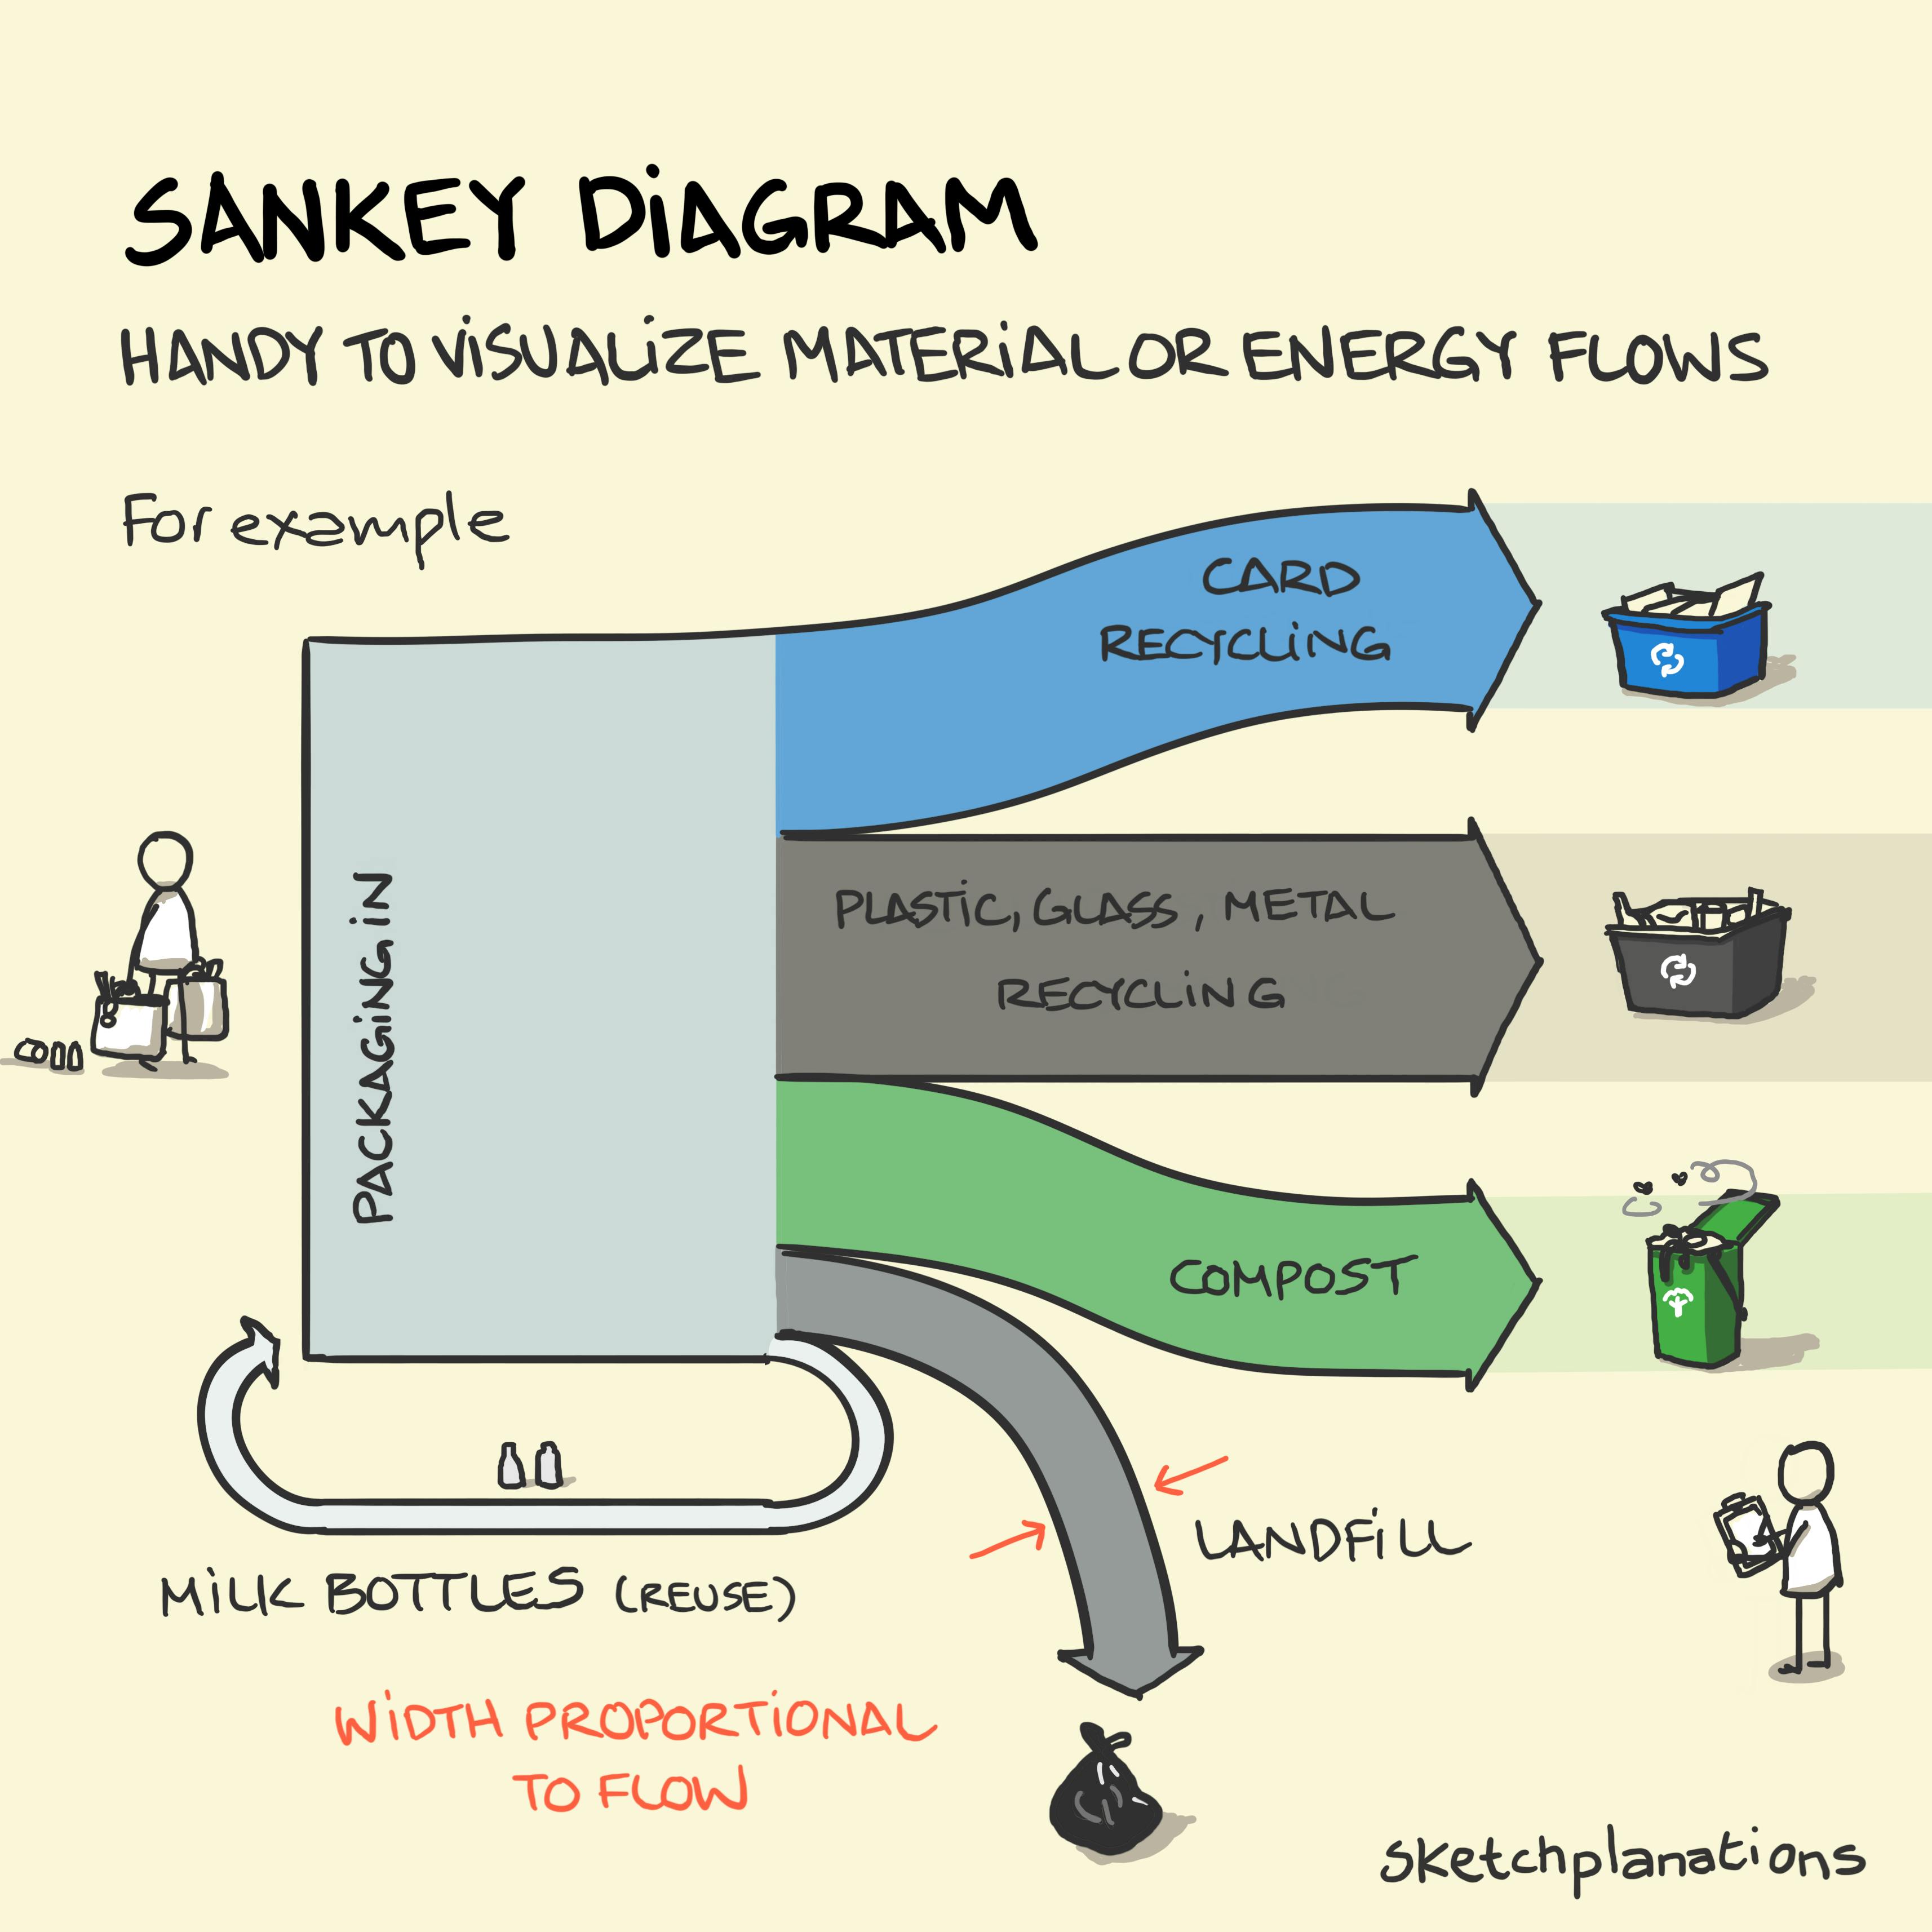 Sankey Diagram illustration: a diagram shows an example of the flow of materials in a system. The example illustrated is the point of disposing of domestic waste. The jumbled, inbound mix of waste brought in on the left gets separated into outbound flows on the right including card recycling; plastic, glass & metal recycling; compost; landfill and directly re-useable items (such as milk bottles). The width of each outbound arrow represents size of flow. 